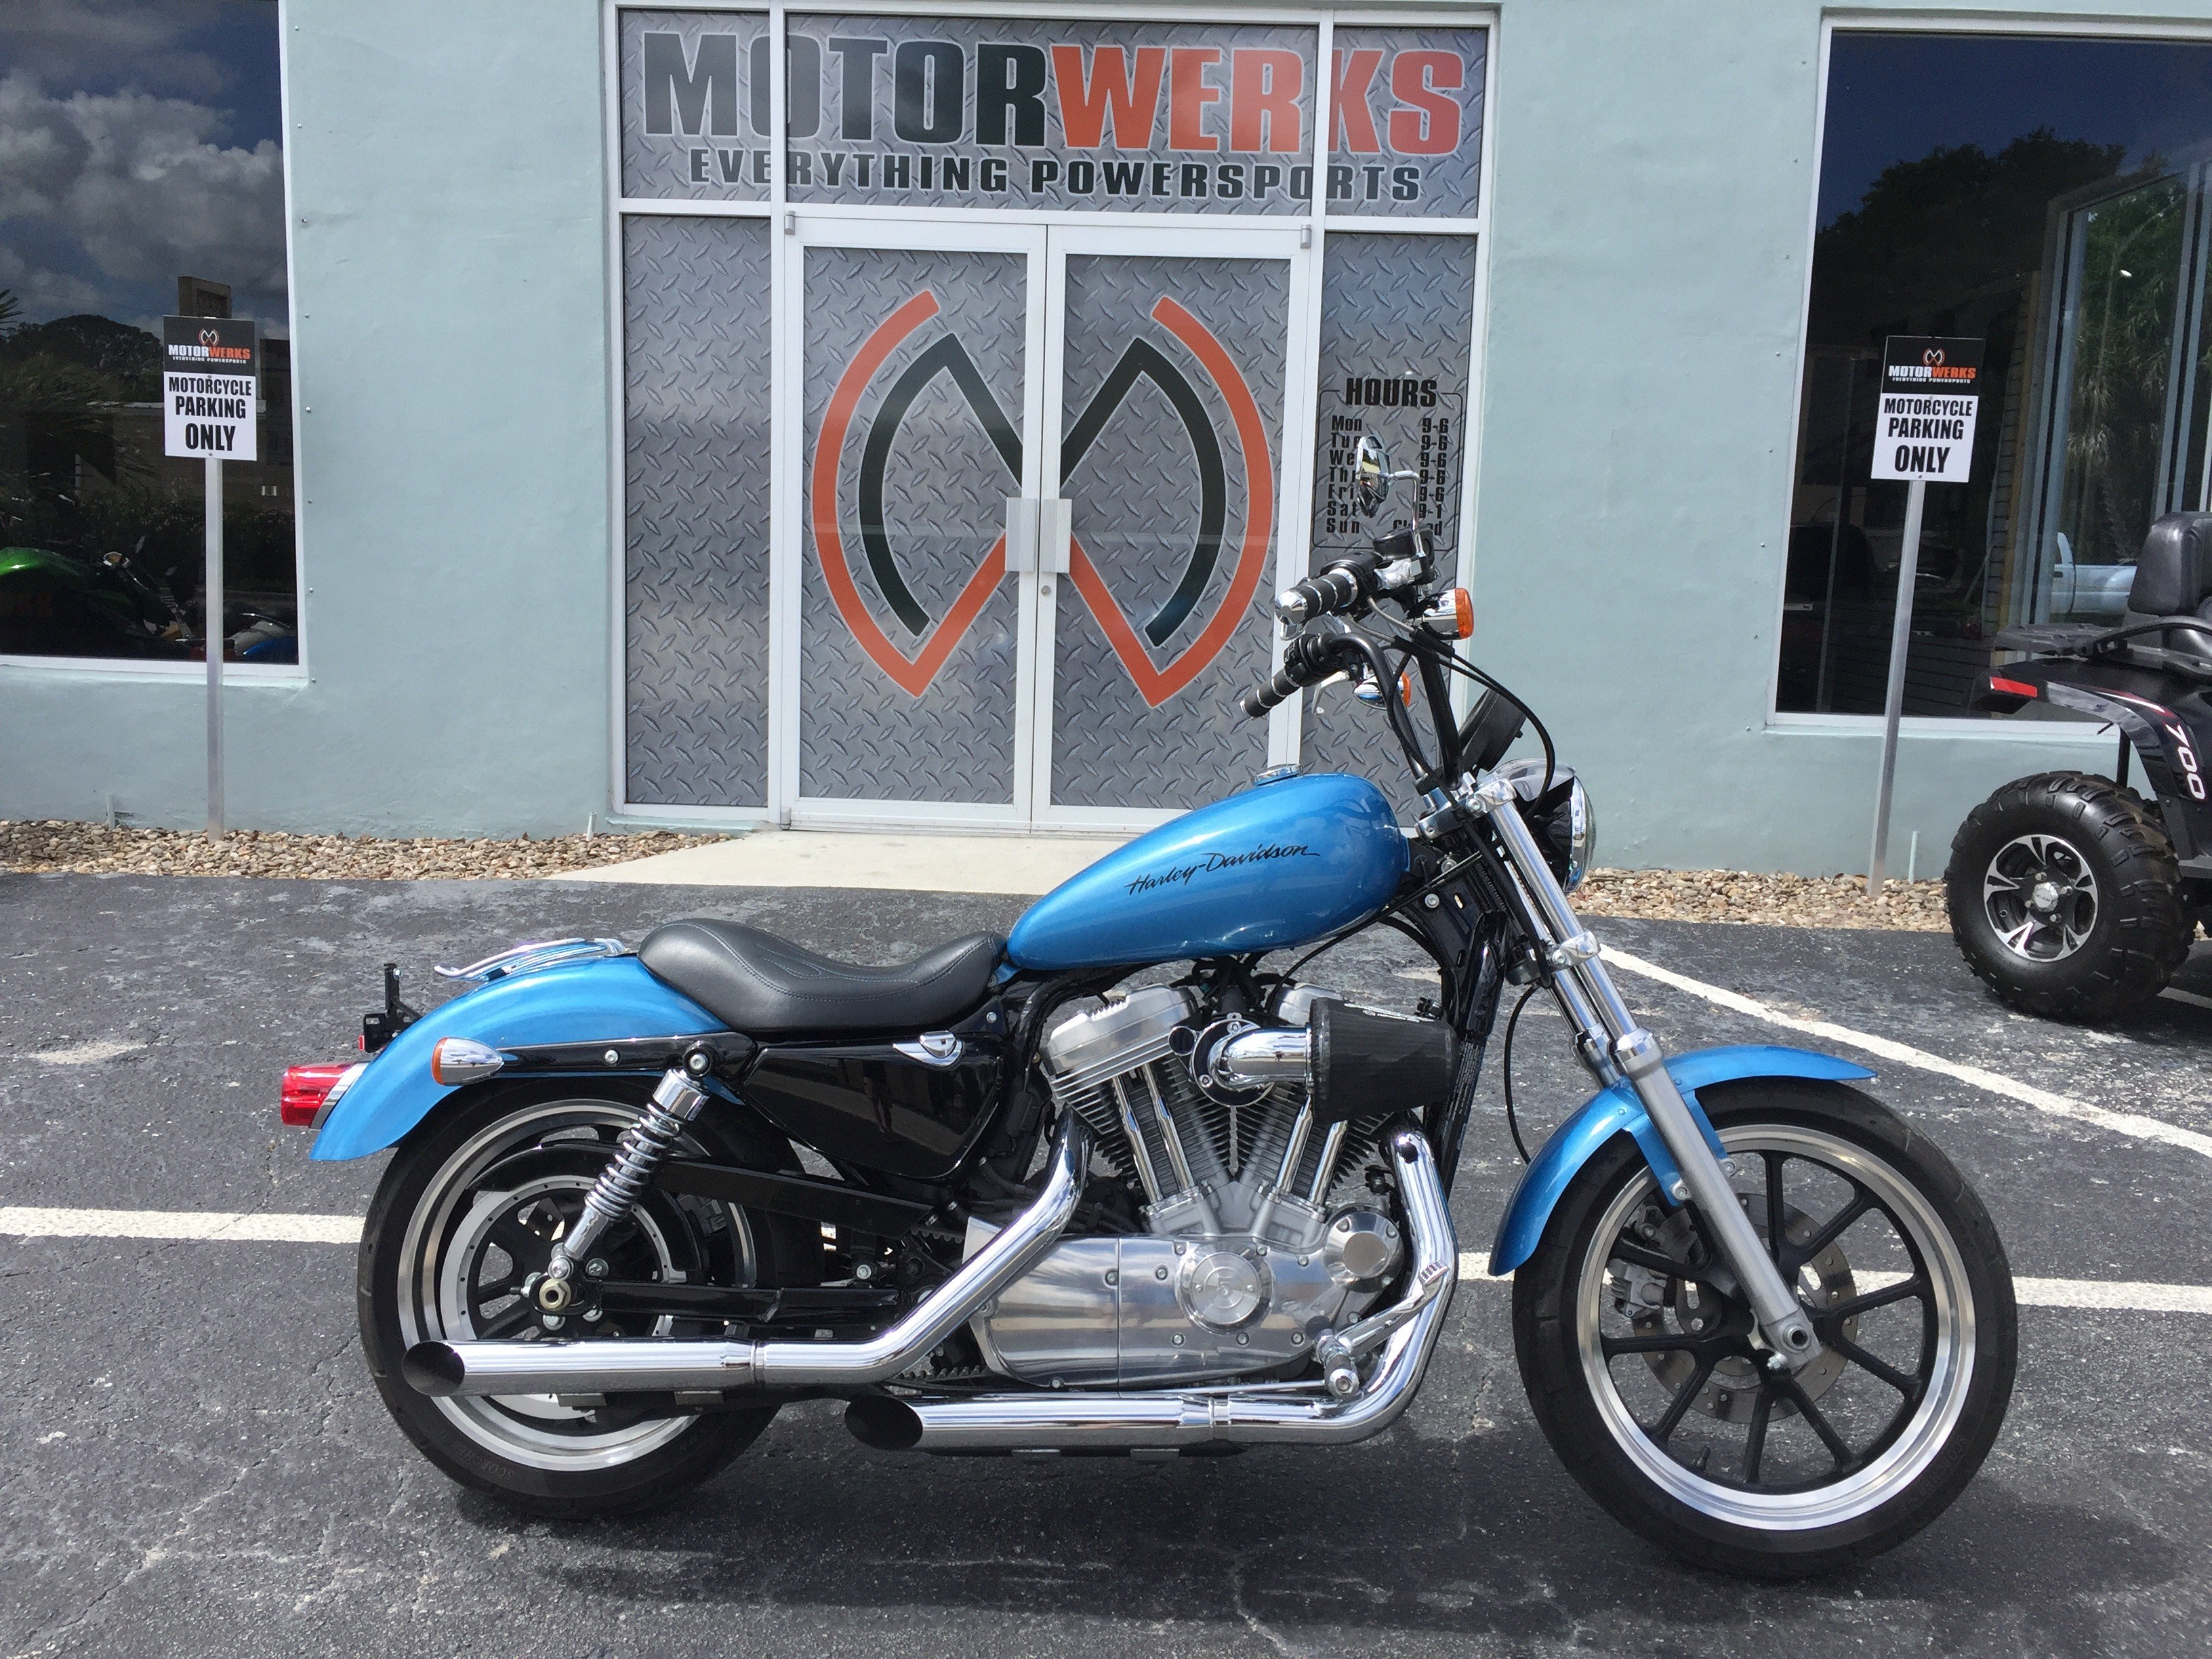 Used 2011 Harley Davidson Sportster 883 Superlow Motorcycles In Cocoa Fl Cool Blue Pearl N A